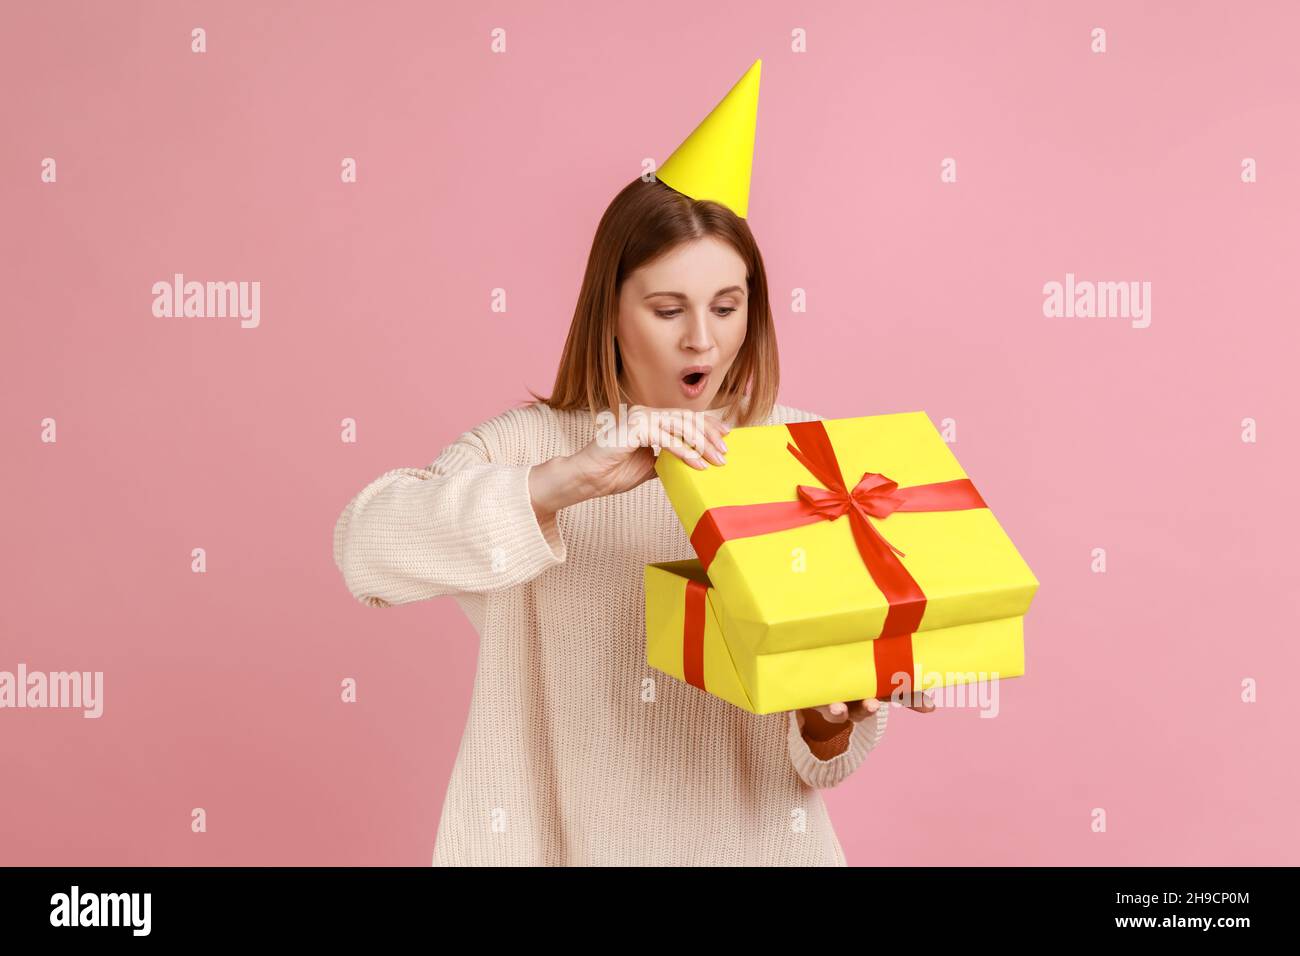 Portrait of excited amazed blond woman in party cone unpacking present box, having pleasant surprise, being shocked, wearing white sweater. Indoor studio shot isolated on pink background. Stock Photo